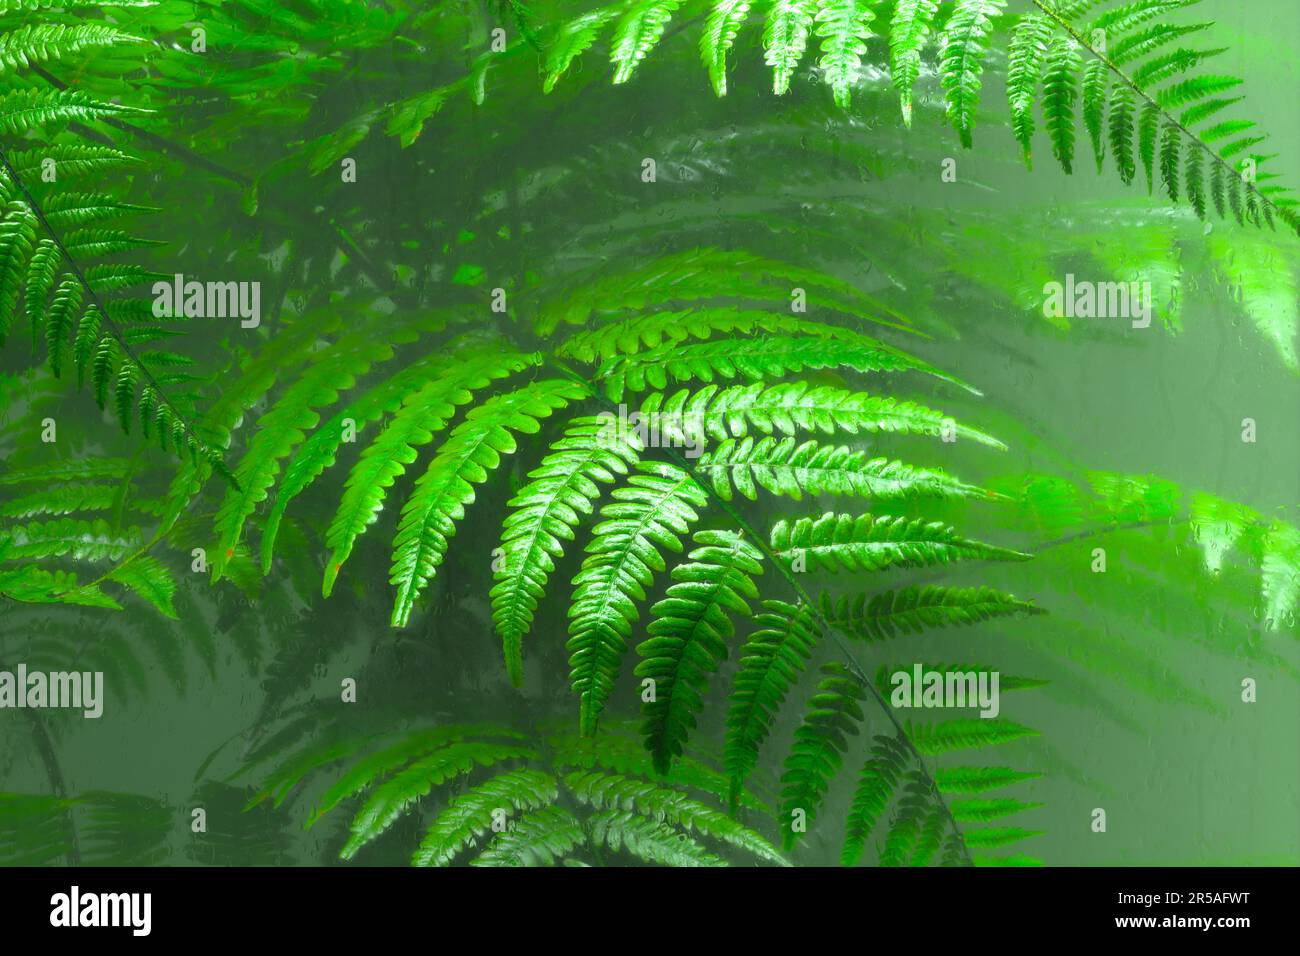 Green fern leaves behind the glass. Natural forest's plants in the glasshouse. Foliage from a tropical environment. Blurry vision. Nature. Botany. Bot Stock Photo